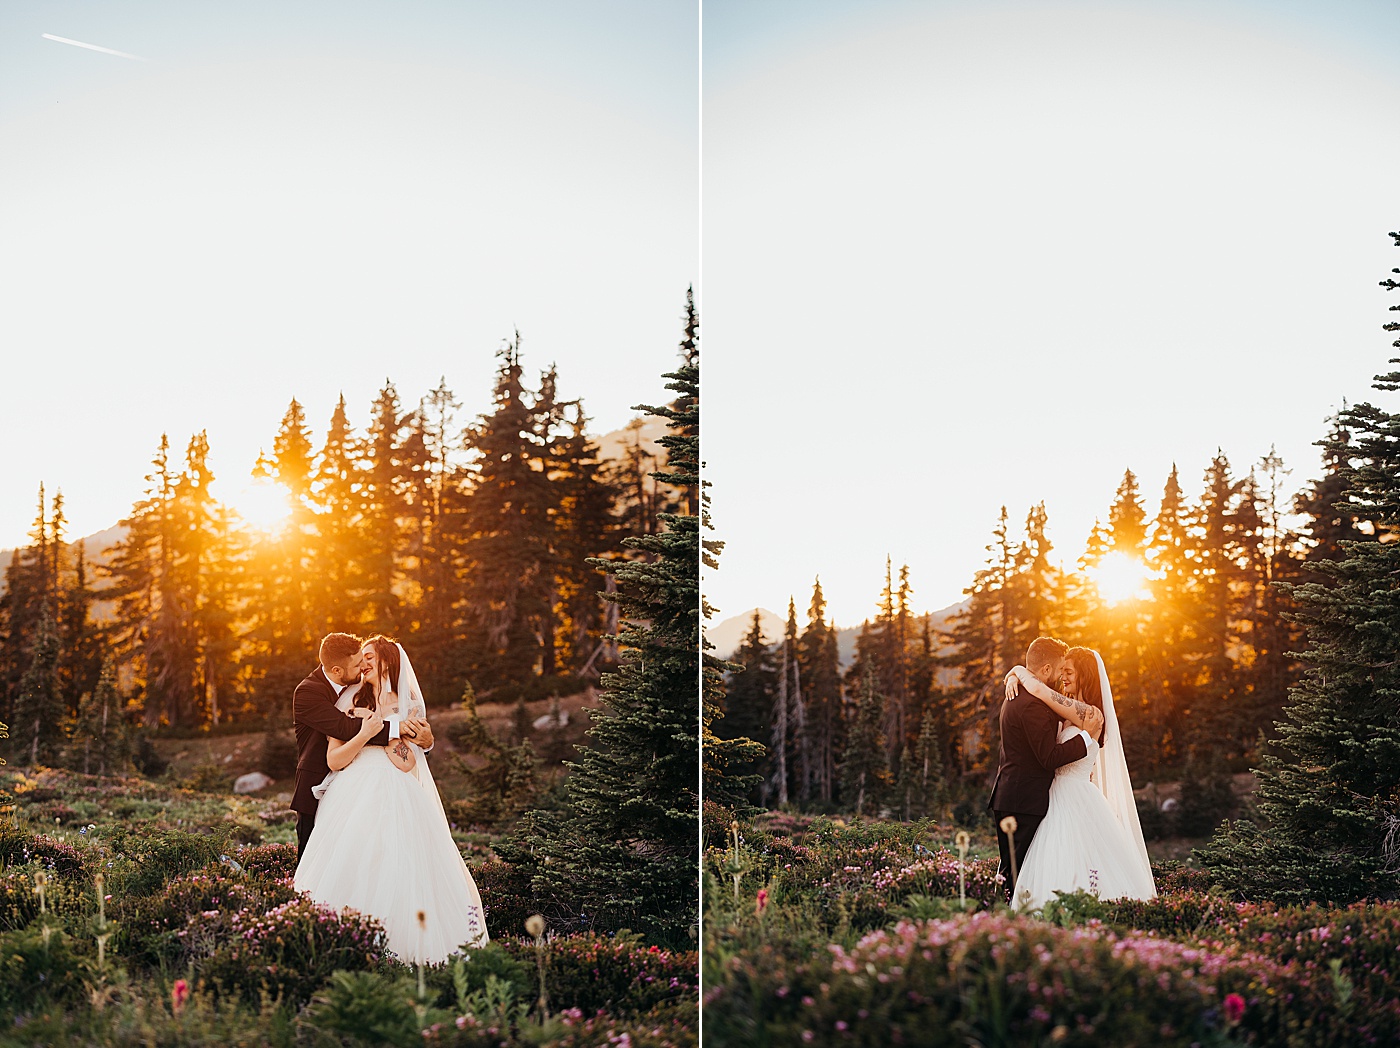 Bride and groom portraits at sunset on the Skyline Trail | Photo by Megan Montalvo Photography